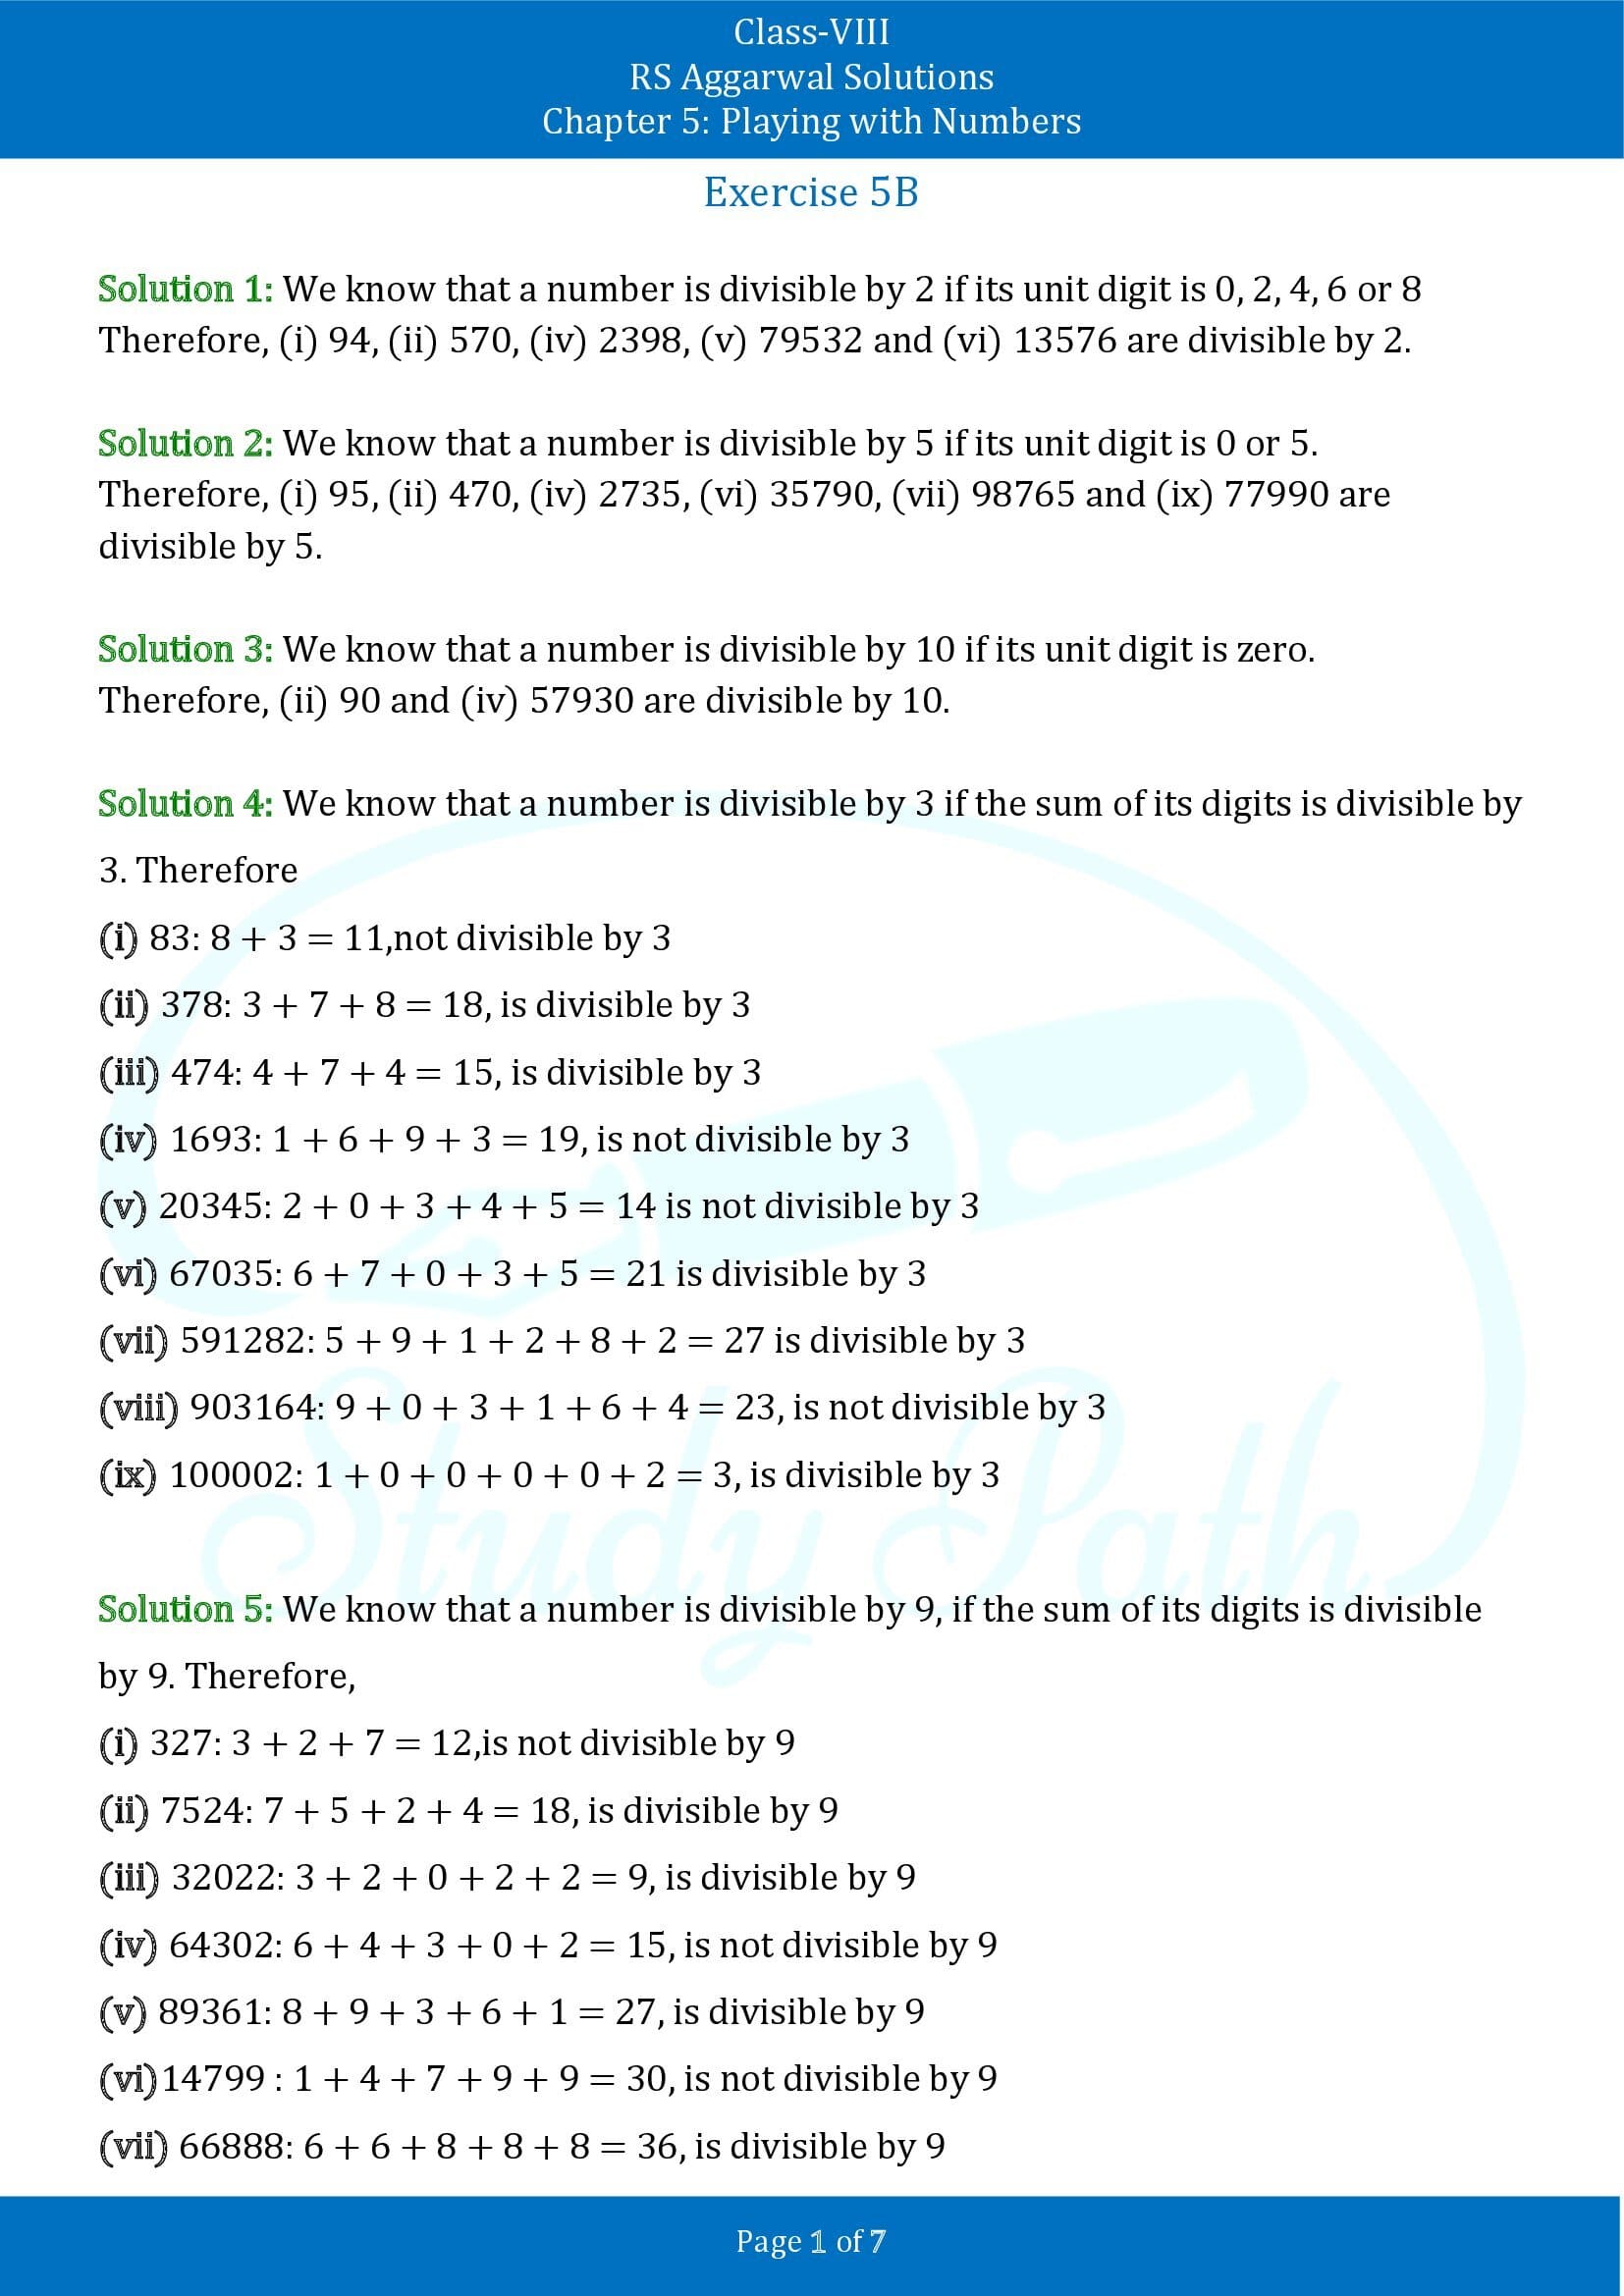 RS Aggarwal Solutions Class 8 Chapter 5 Playing with Numbers Exercise 5B 00001